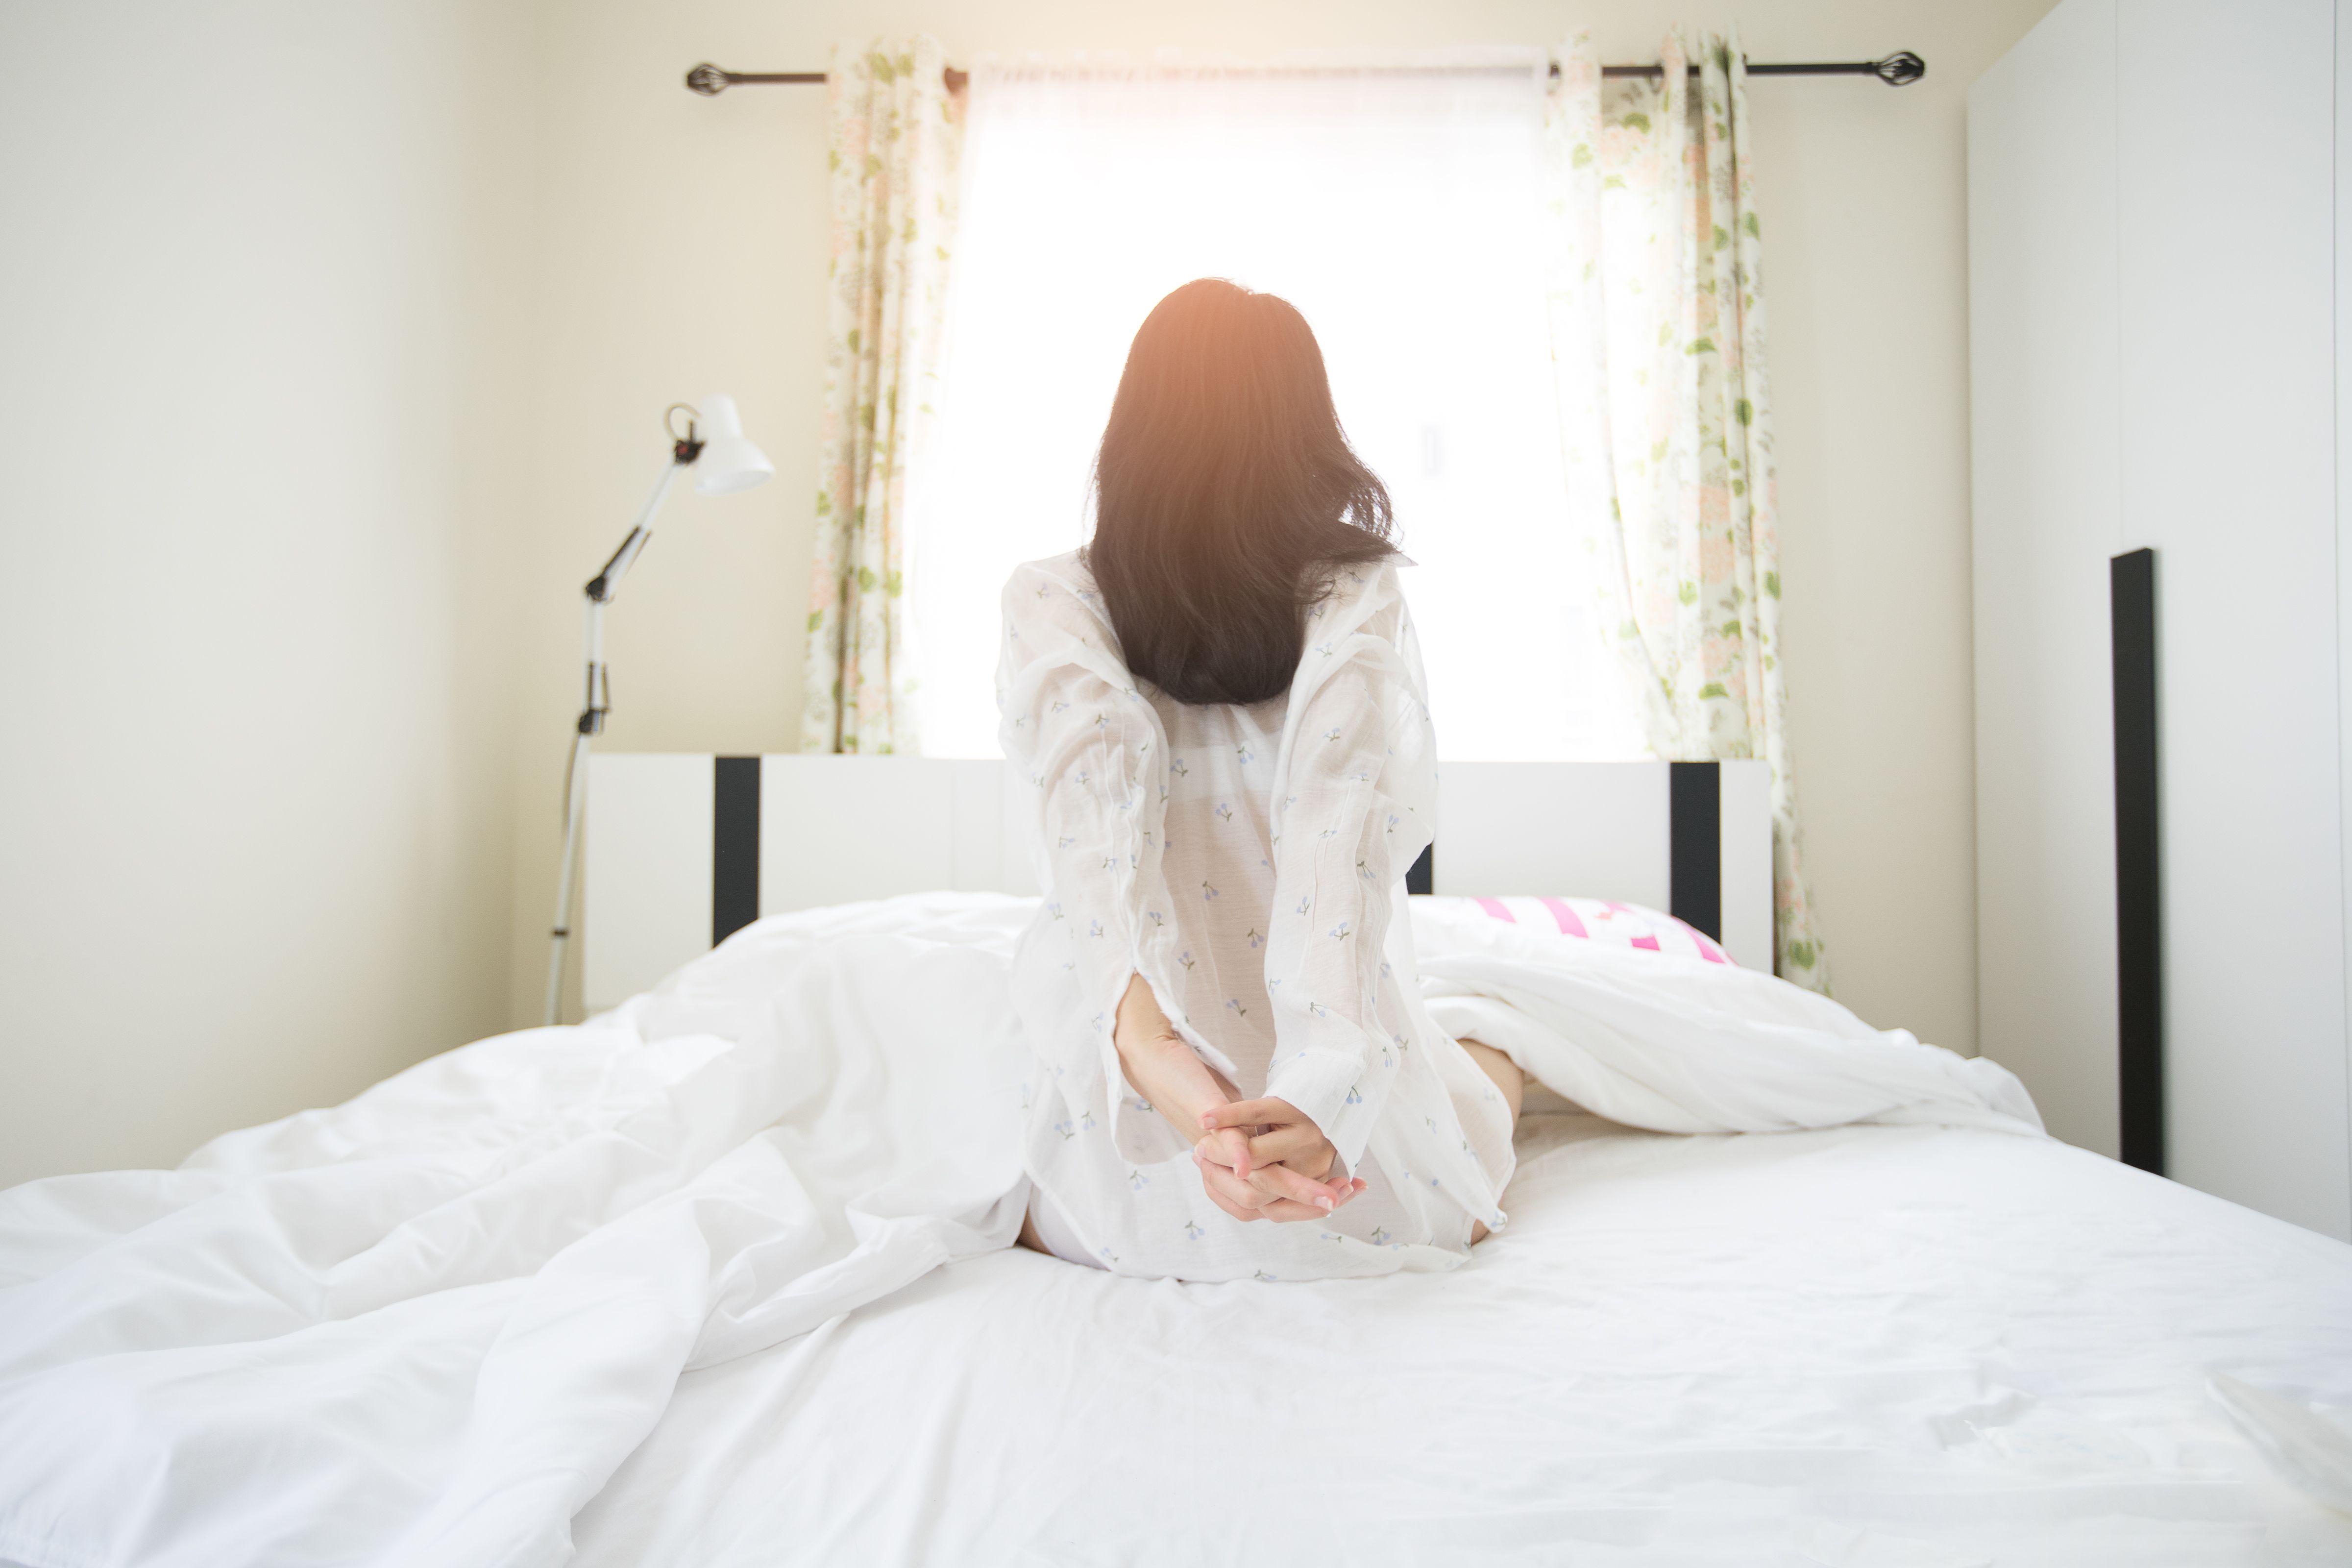 https://hips.hearstapps.com/hmg-prod/images/beautiful-asian-girl-lazy-wake-up-in-early-morning-royalty-free-image-1071974586-1544546679.jpg